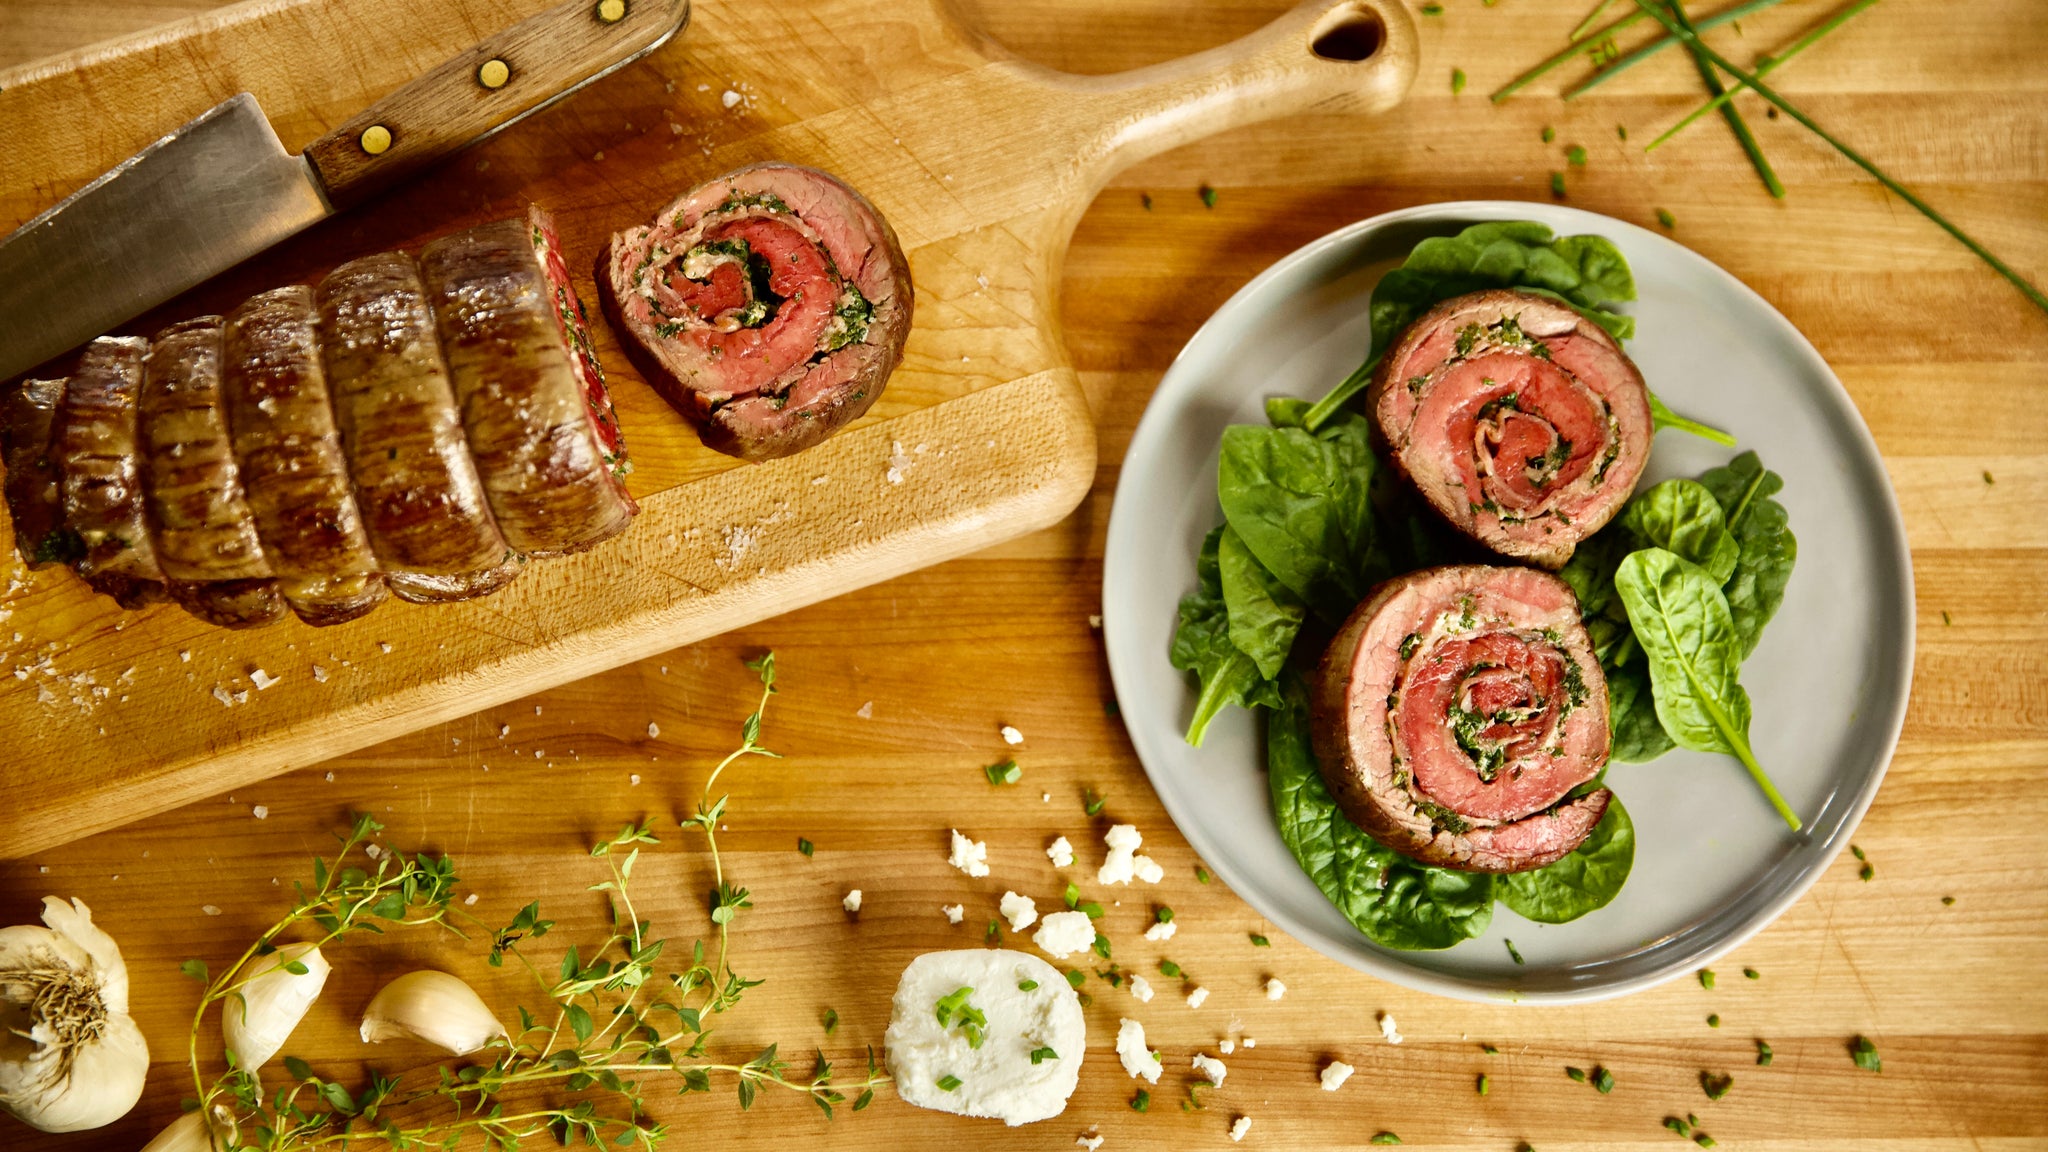 Rolled Flank Steak with Goat Cheese & Herbs